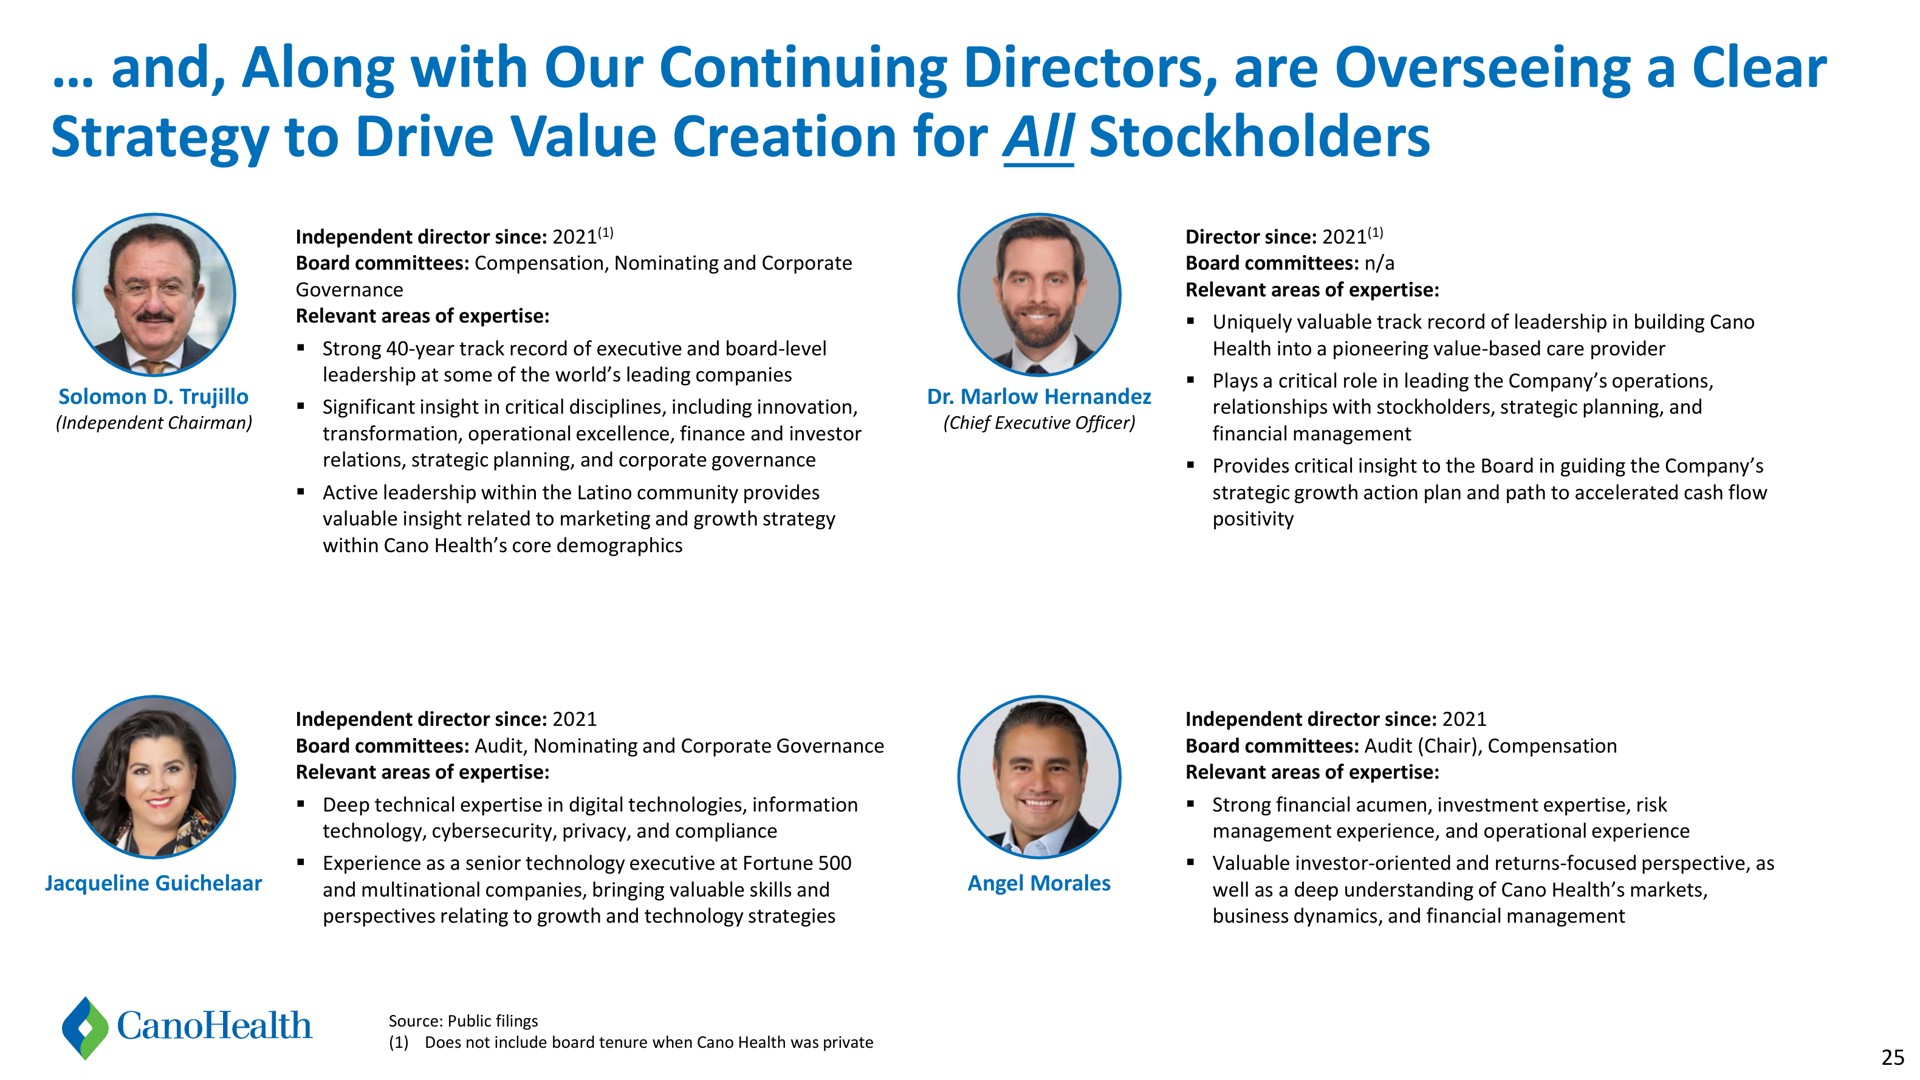 and along with our continuing directors are overseeing a clear strategy to drive value creation for all stockholders | Cano Health